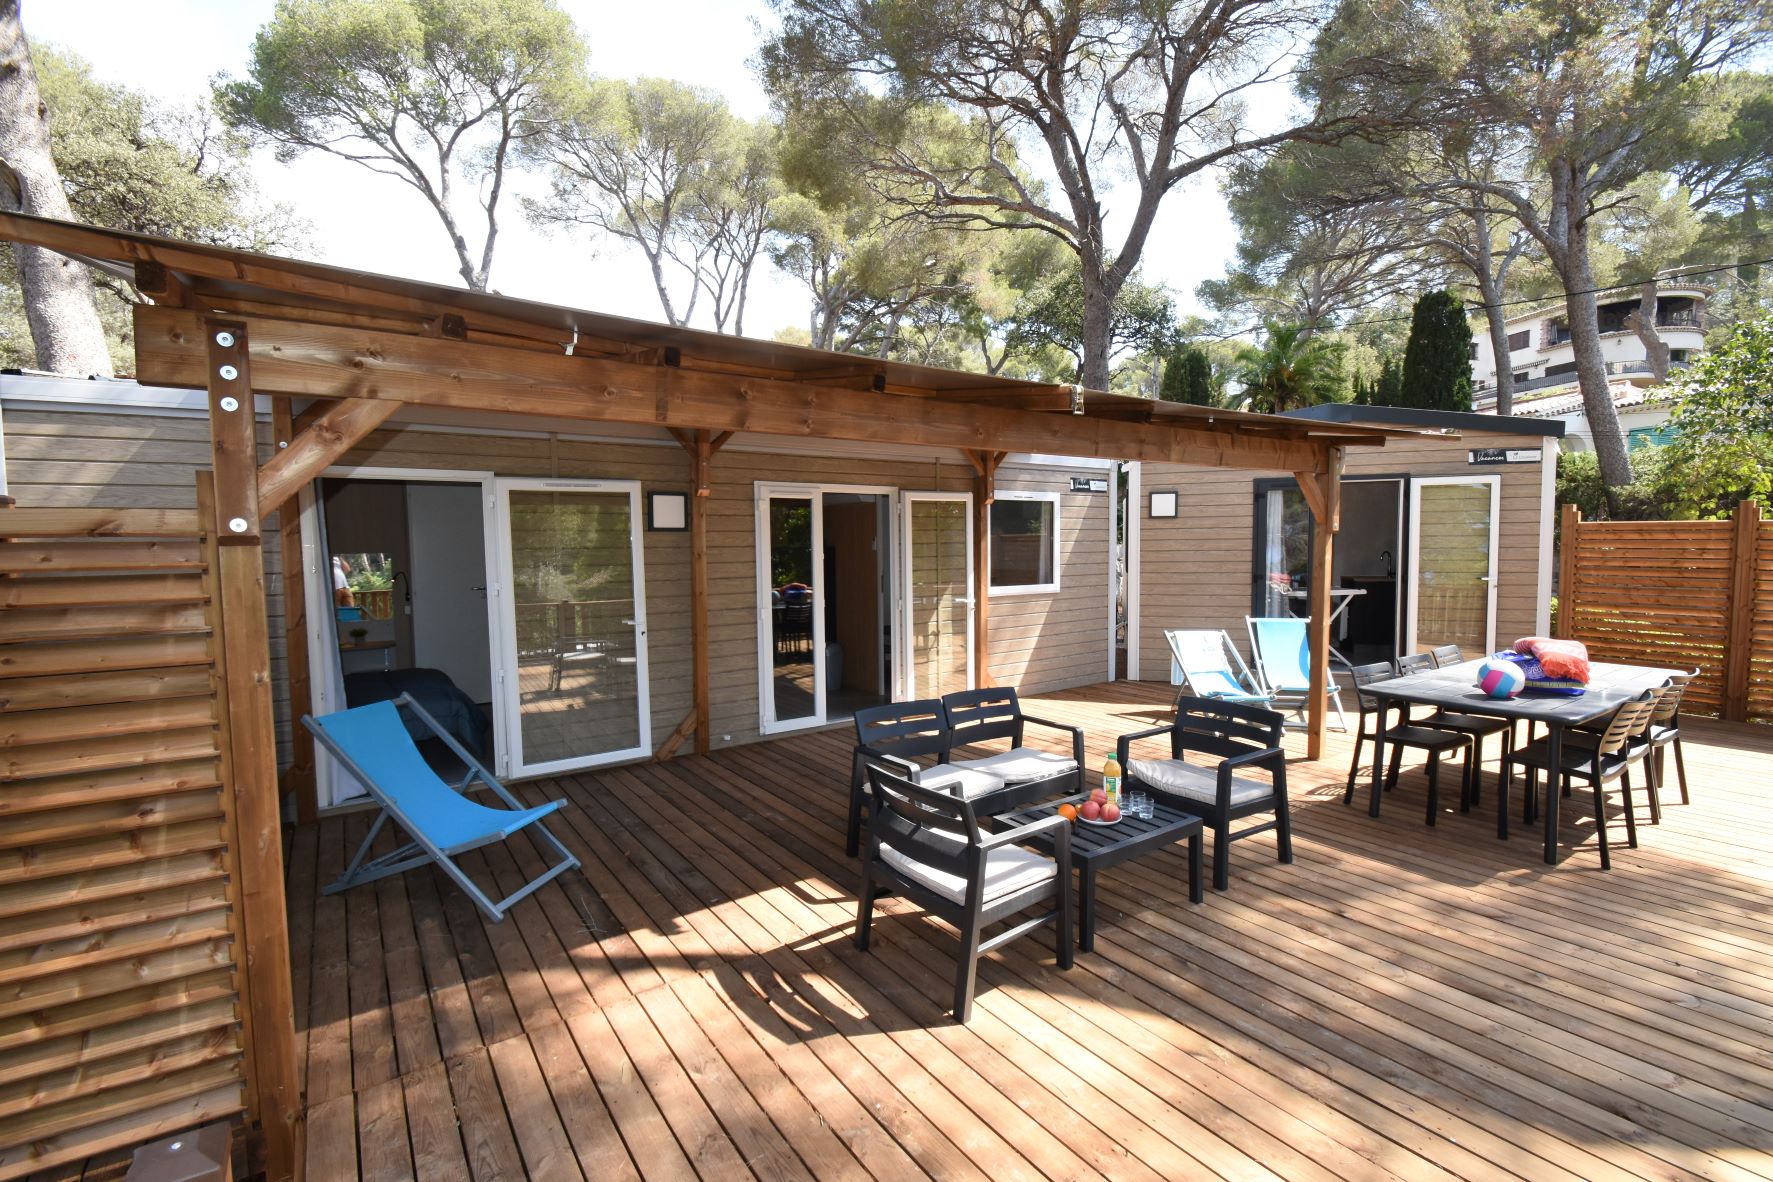 Accommodation - Mobile-Home Belvédère 3 Bedrooms - 3 Bathrooms Super Privilège With Stunning Seaview - Camping Plage du Dramont